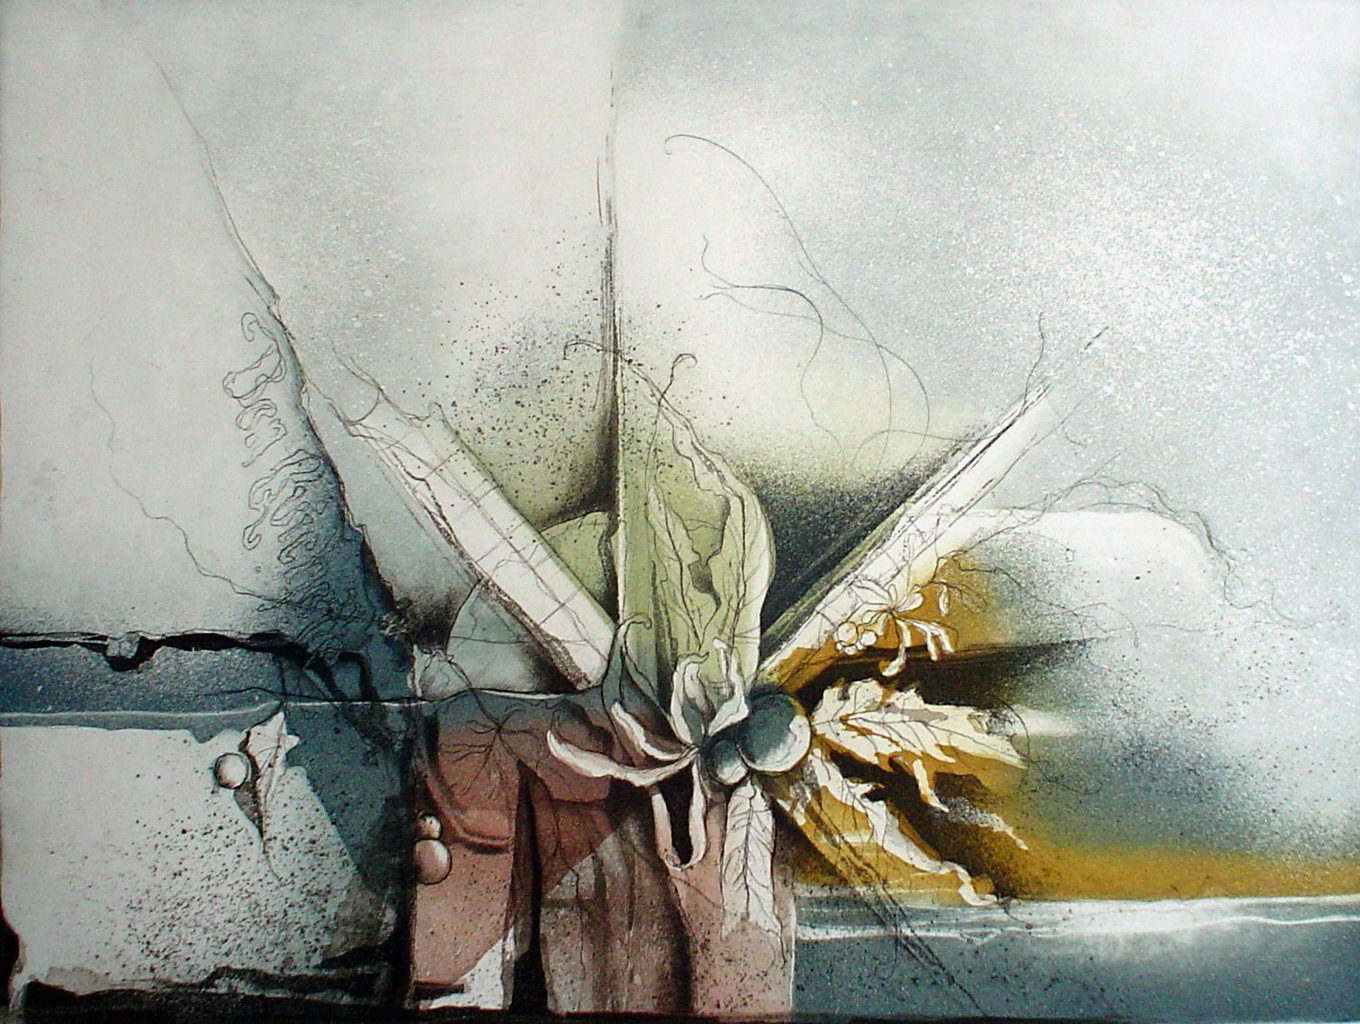 Blue Flower Autumn Colours by Ruediger Brassel - original etching, signed and numbered 75/ 99